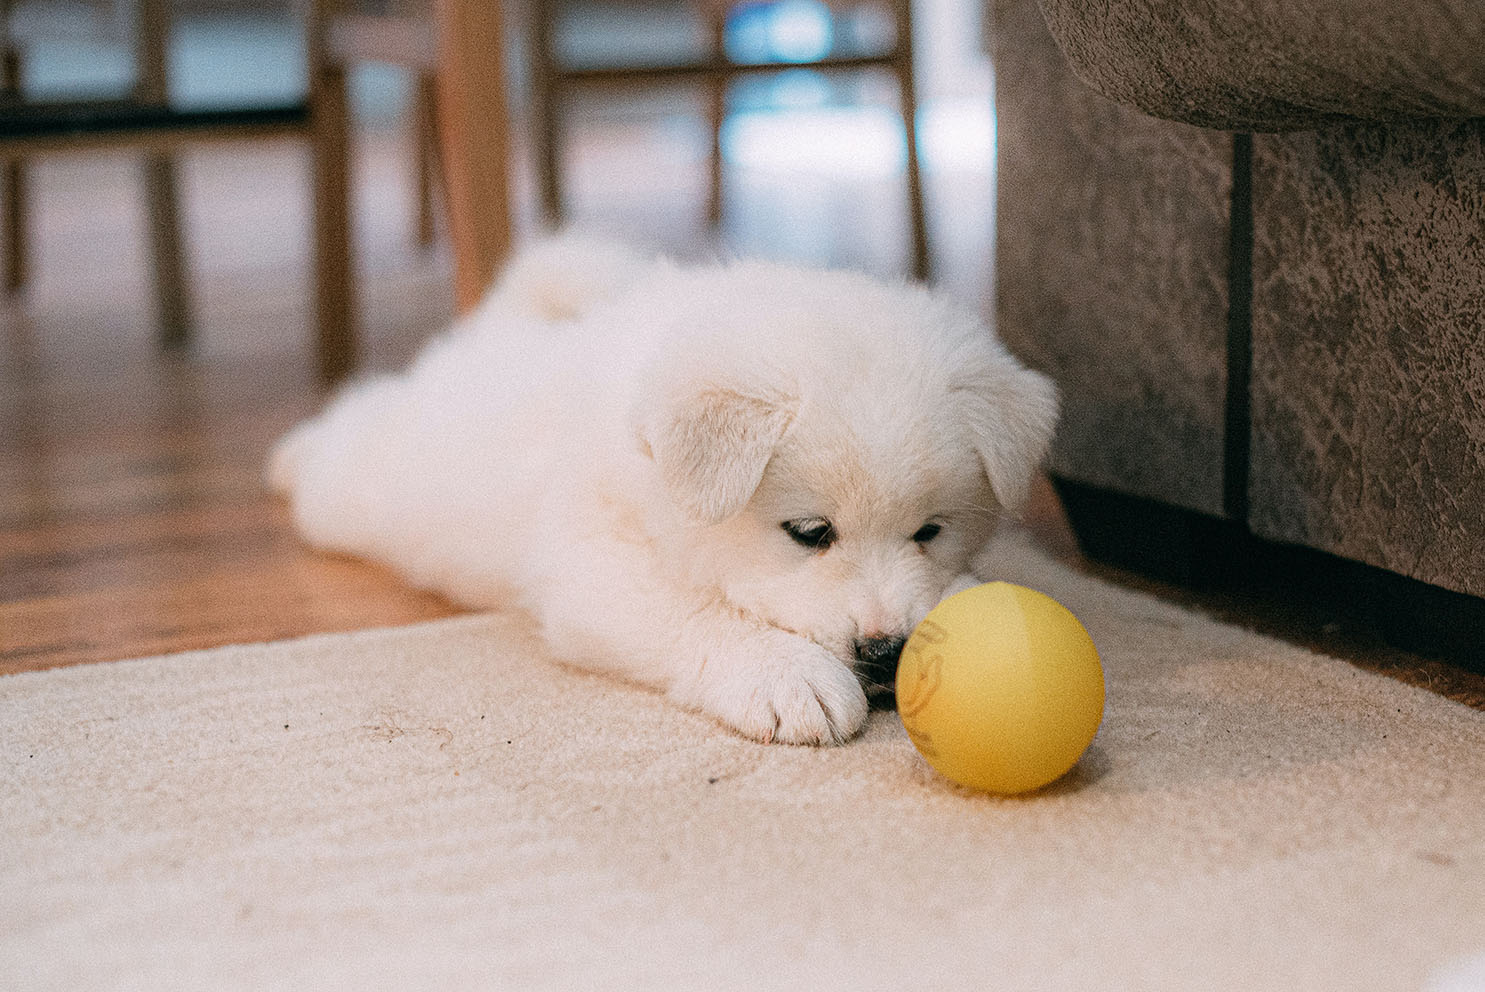 Dog-Proofing A Home: 6 Ways to Keep Your Pet Safe at Home